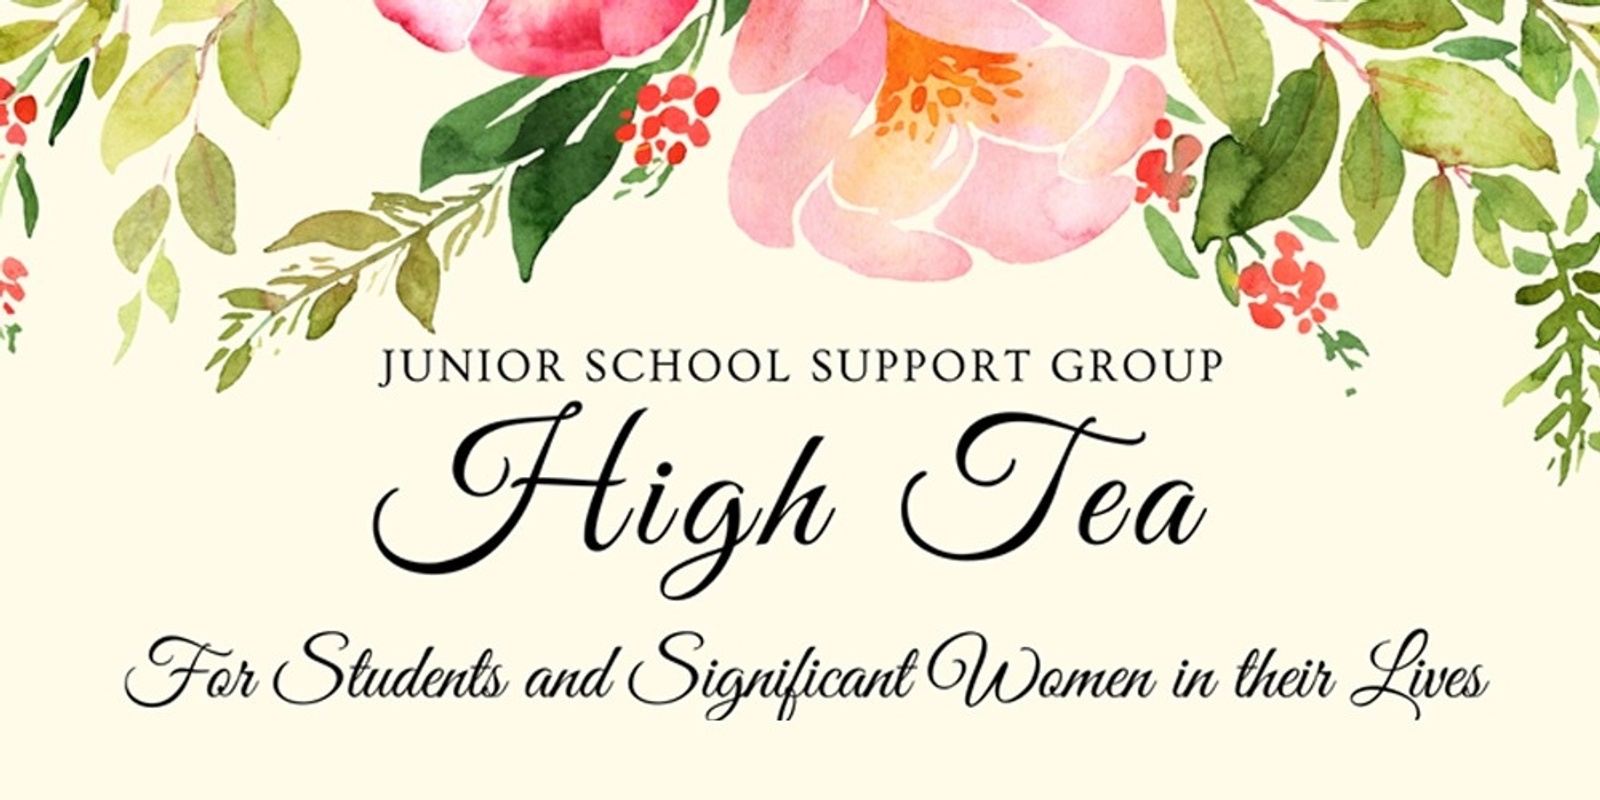 Banner image for JSSG High Tea for Students and Significant Women in their Lives